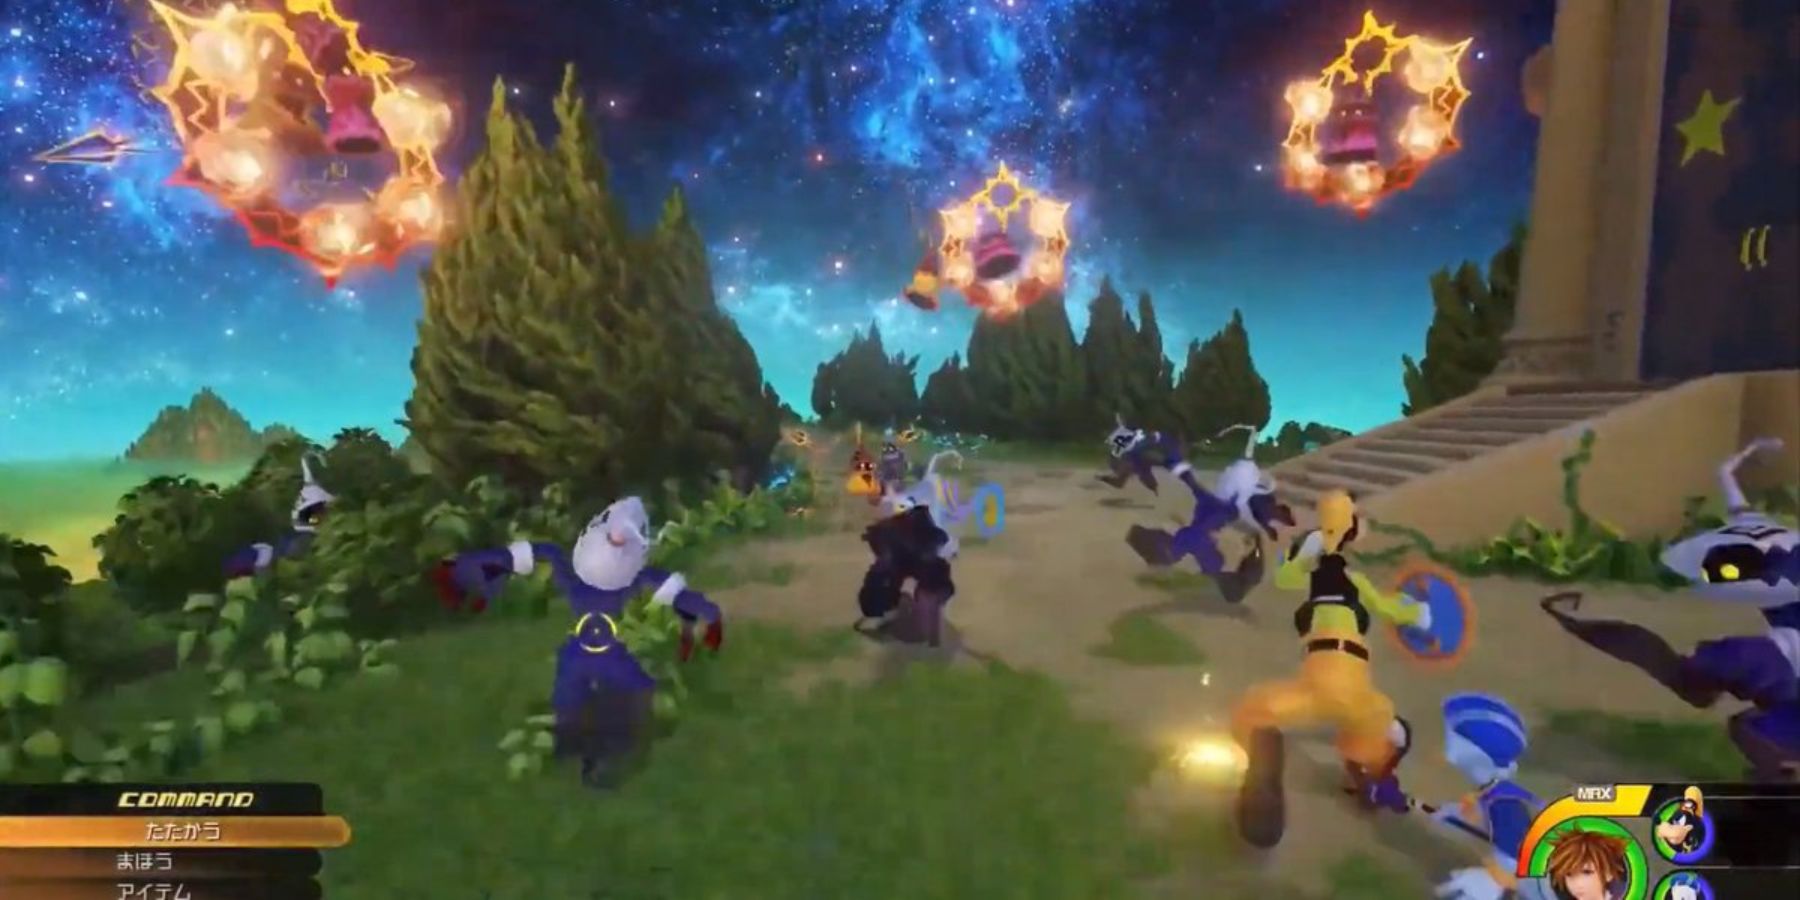 Sora, Donald, and Goofy fighting Heartless outside the Mysterious Tower (Kingdom Hearts 3)